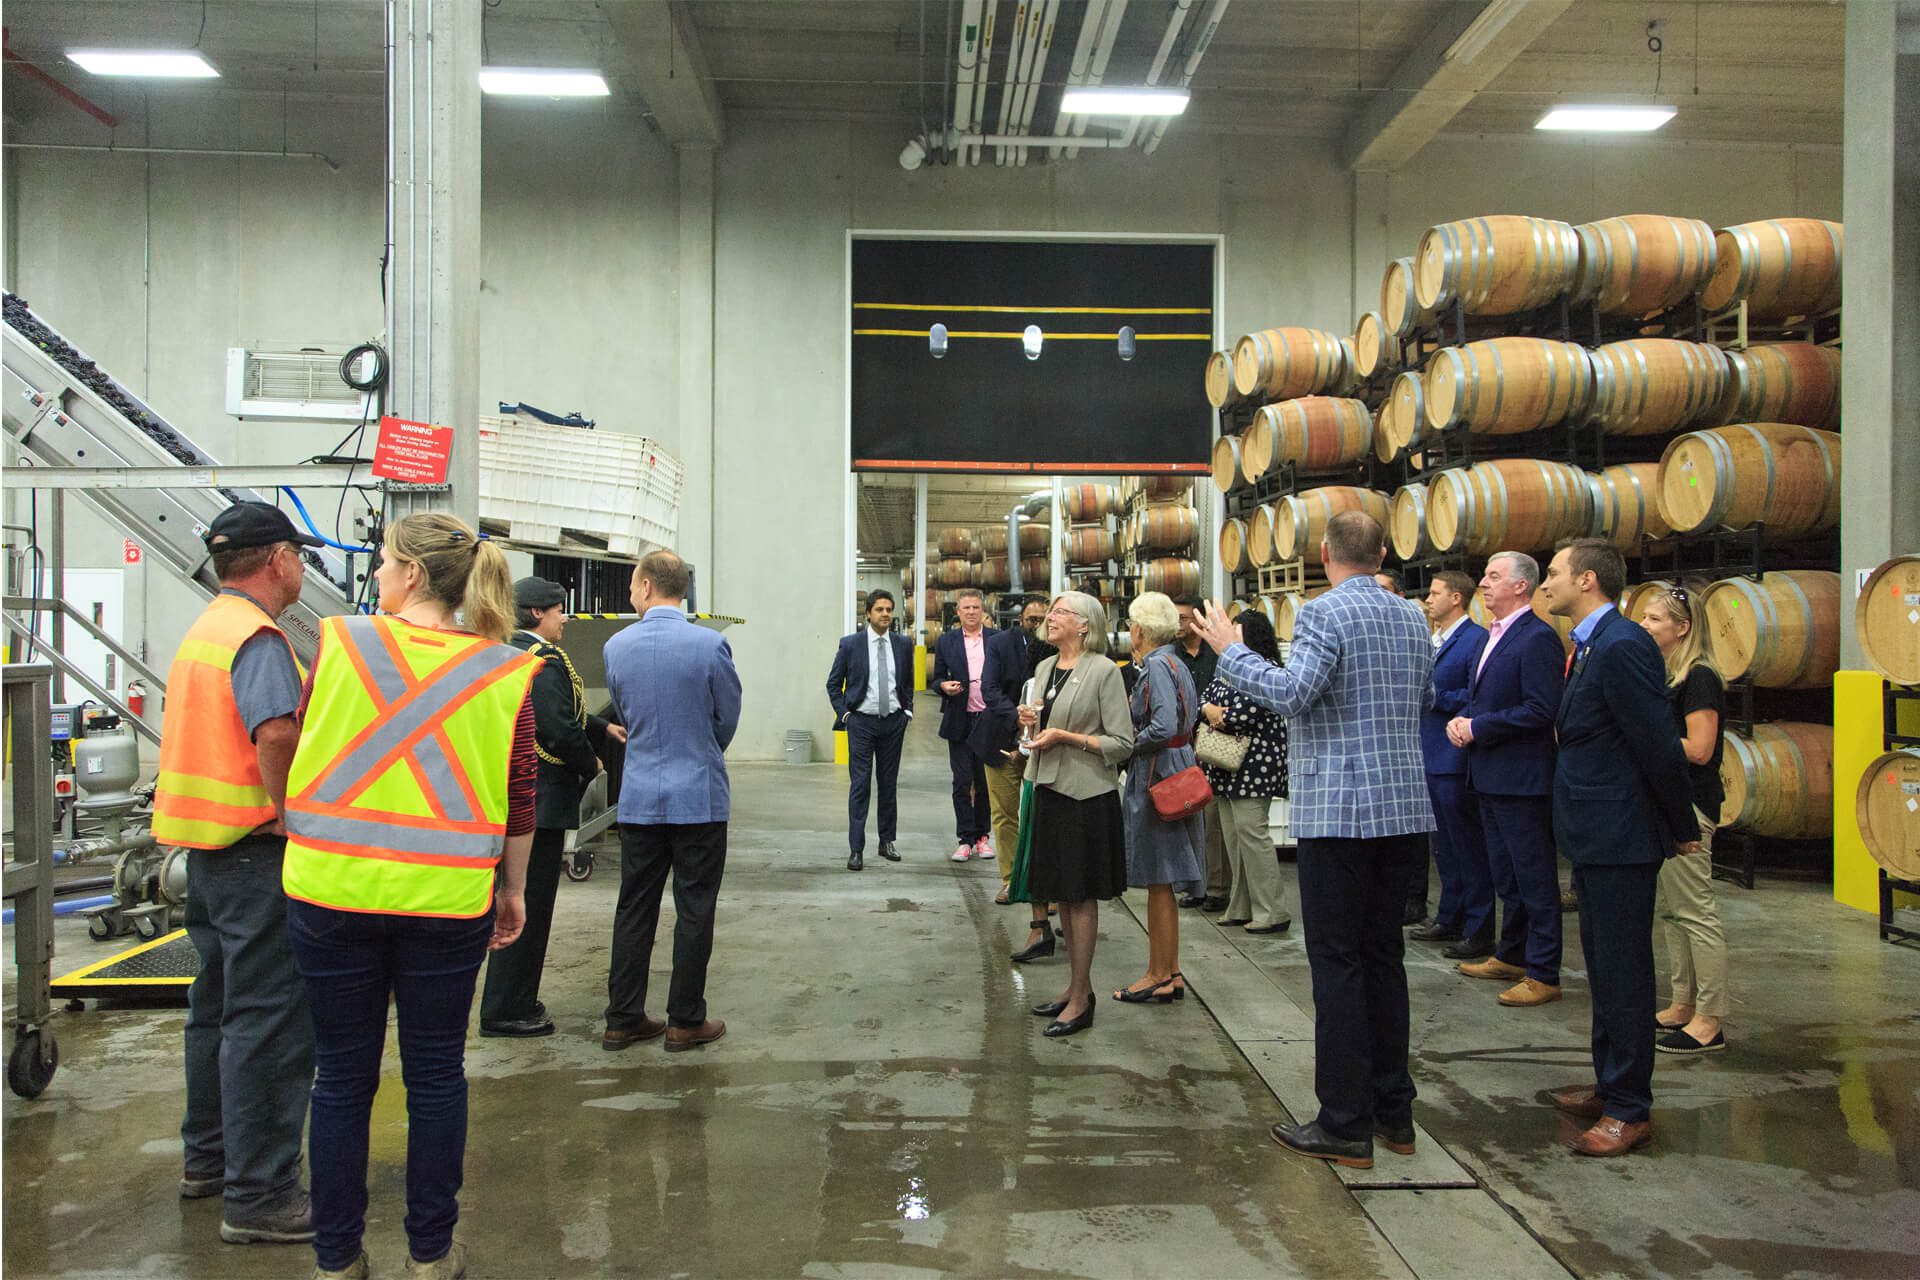 Mission Hill Winery in West Kelowna hosted a lunch and a tour of its winemaking facilities.